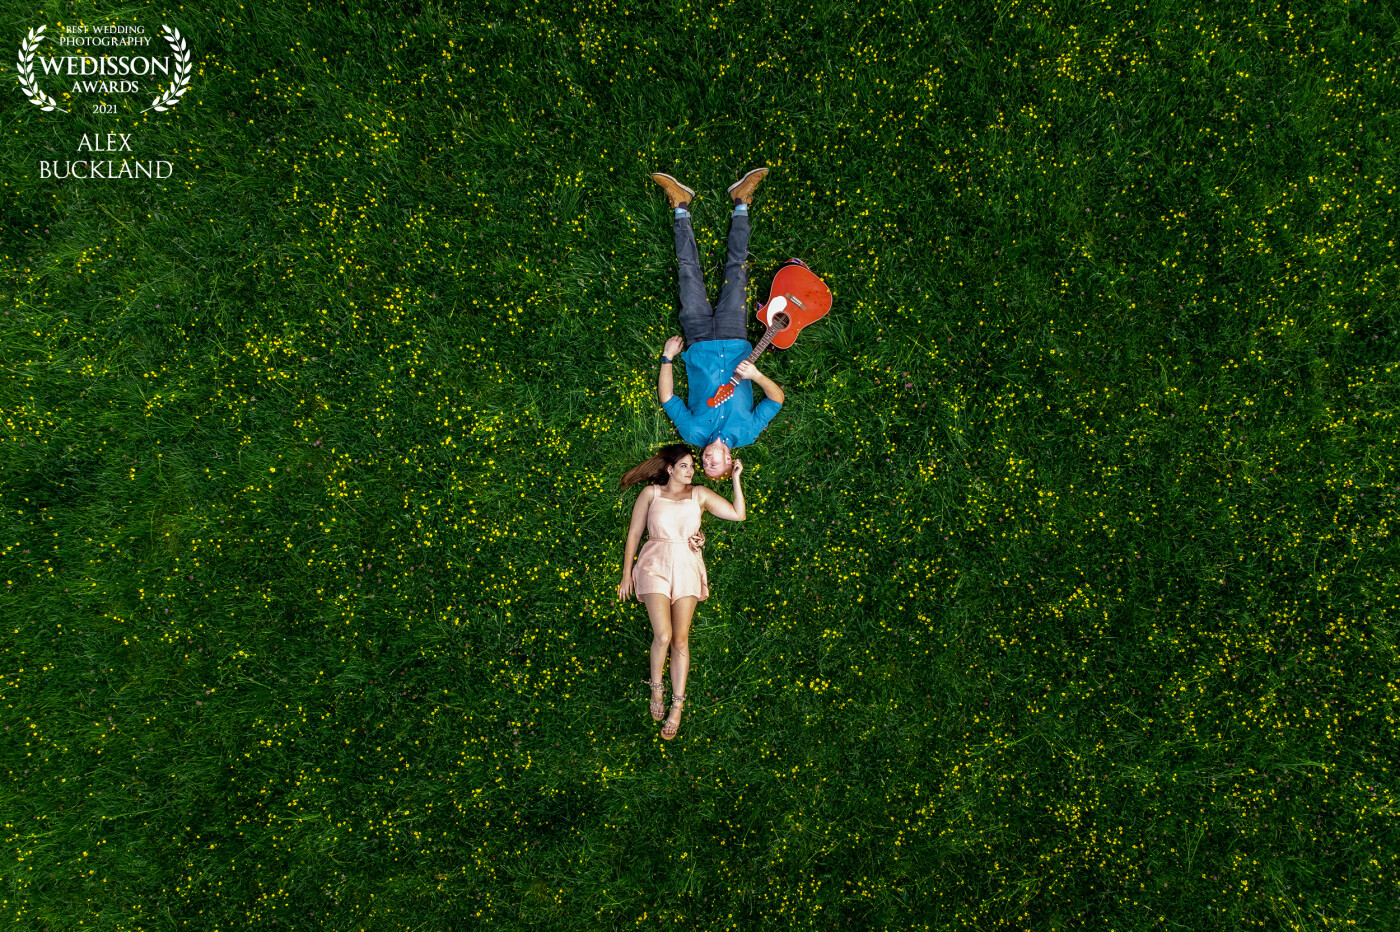 We had originally planned for this couples pre wedding shoot in a rapeseed field but missed out by a couple of days due to the field being harvested. So instead, we found this field of buttercups for this drone shot. We incorporated the guitar as the couple are in a band and really helped represent them!